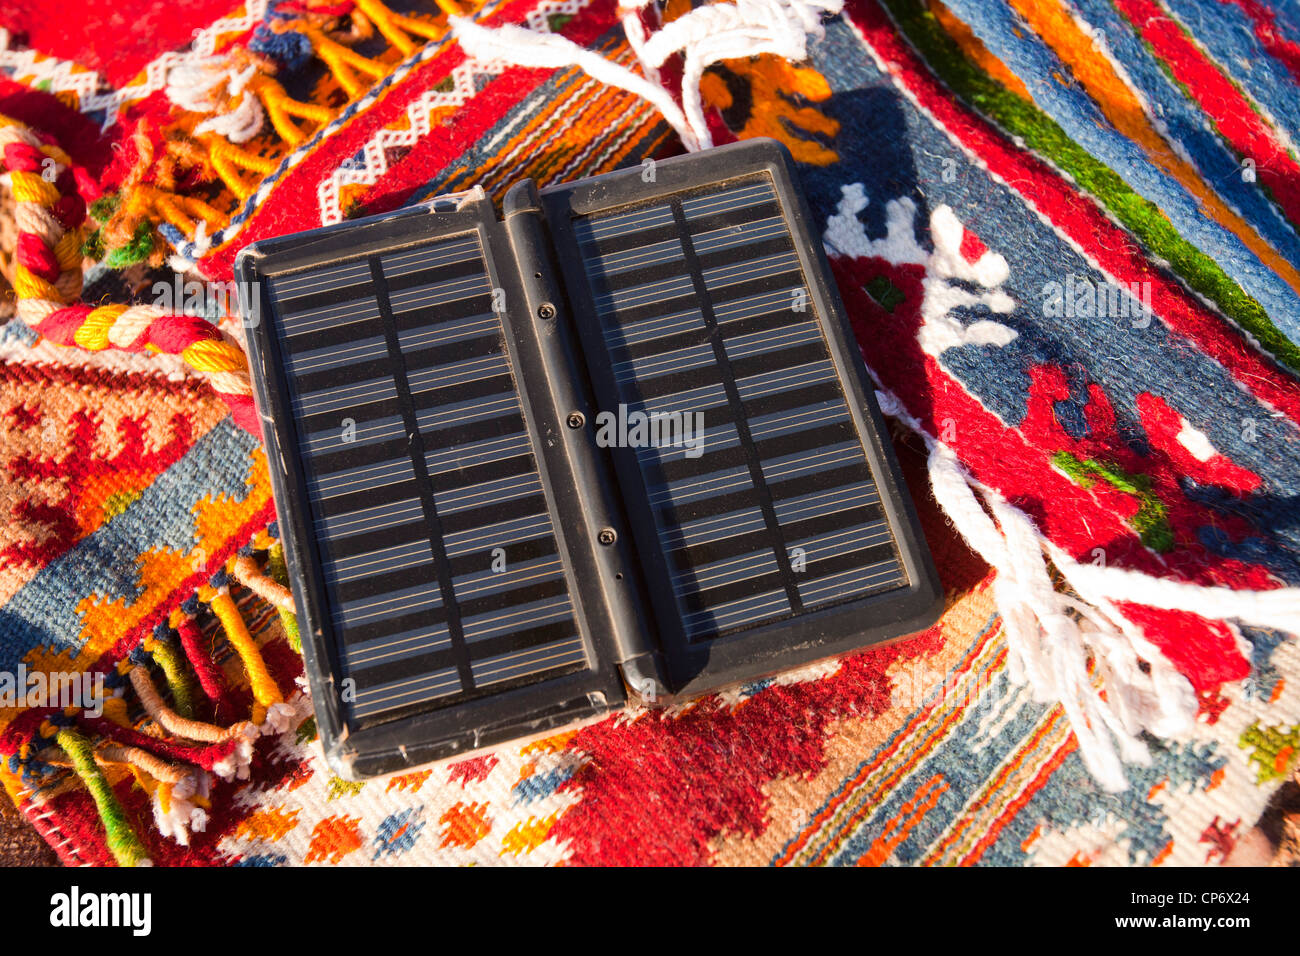 Berber Moroccan woven cloth rugs and bags in the Anti Atlas mountains of Morocco, North Africa, with a solar charger. Stock Photo